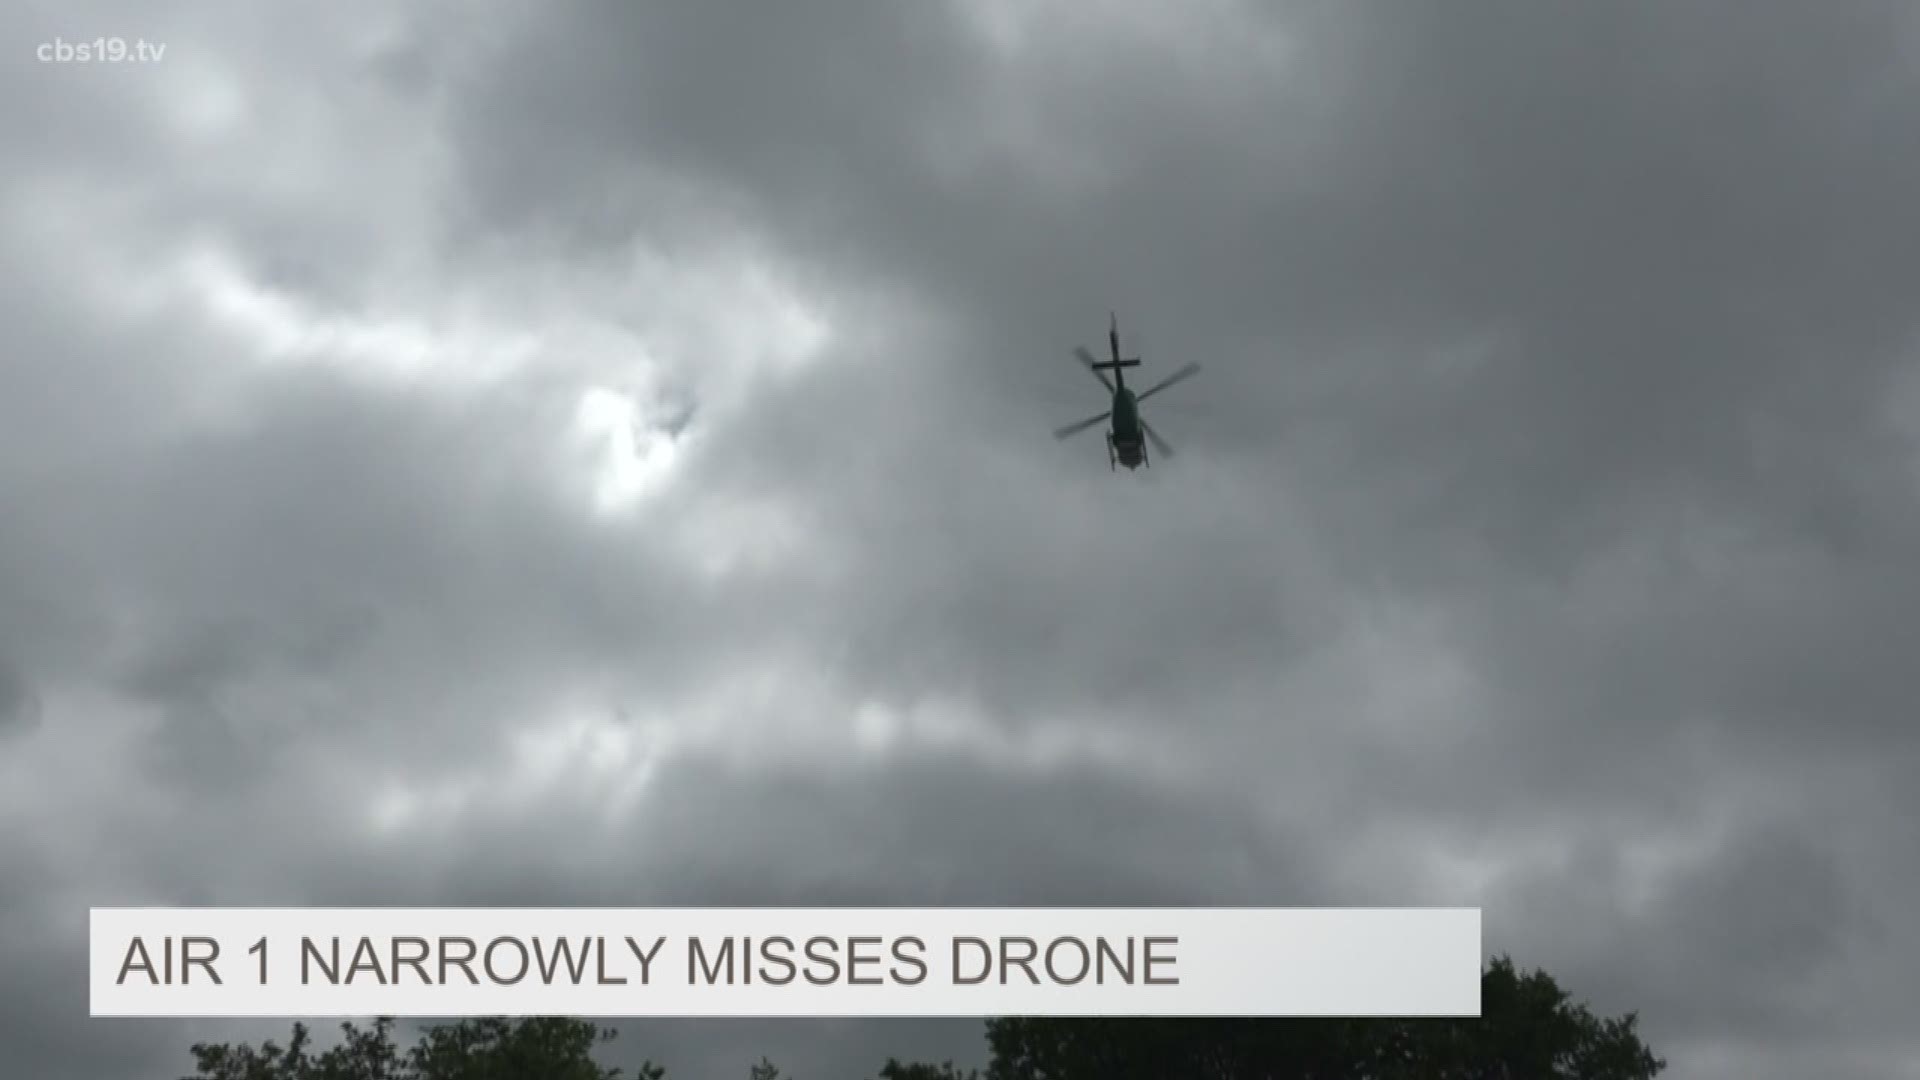 Helicoptor pilots near miss with a drone